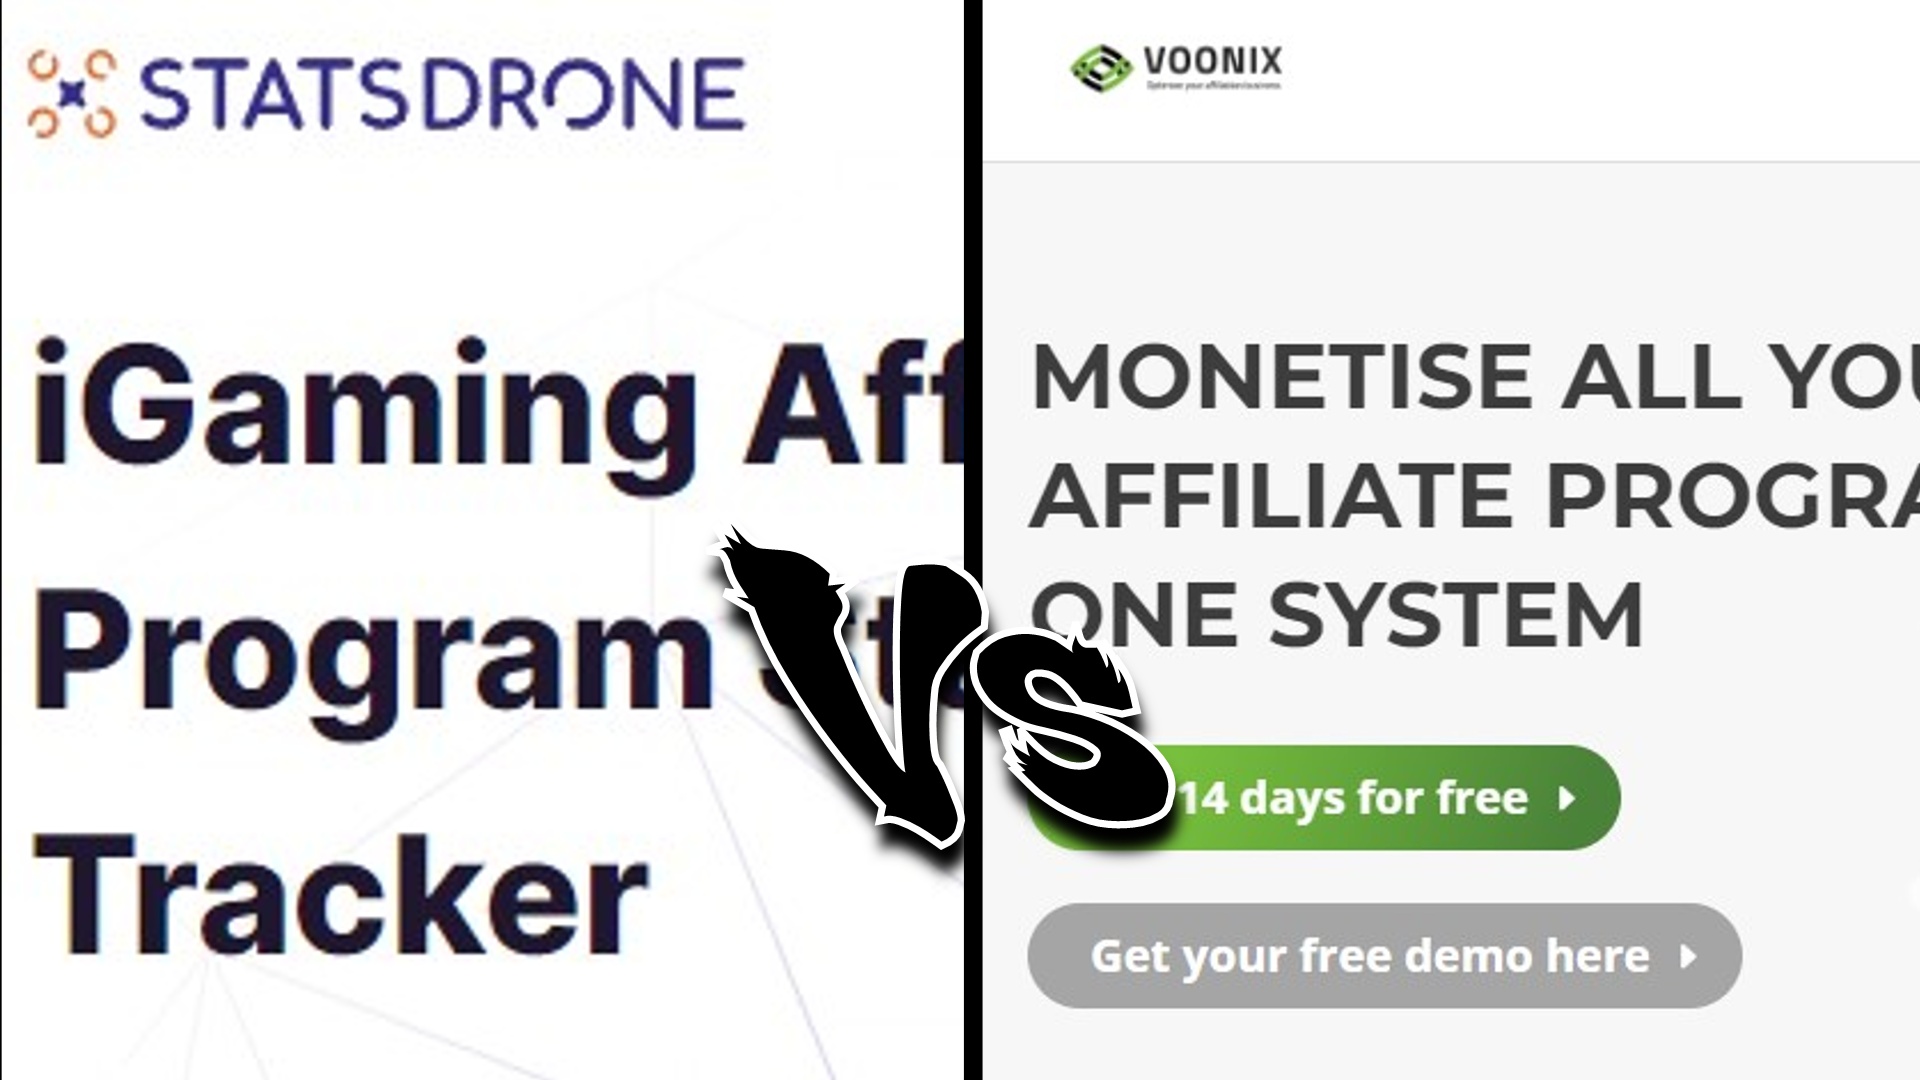 Voonix vs StatsDrone in 2023 - Features, Prices and Differences